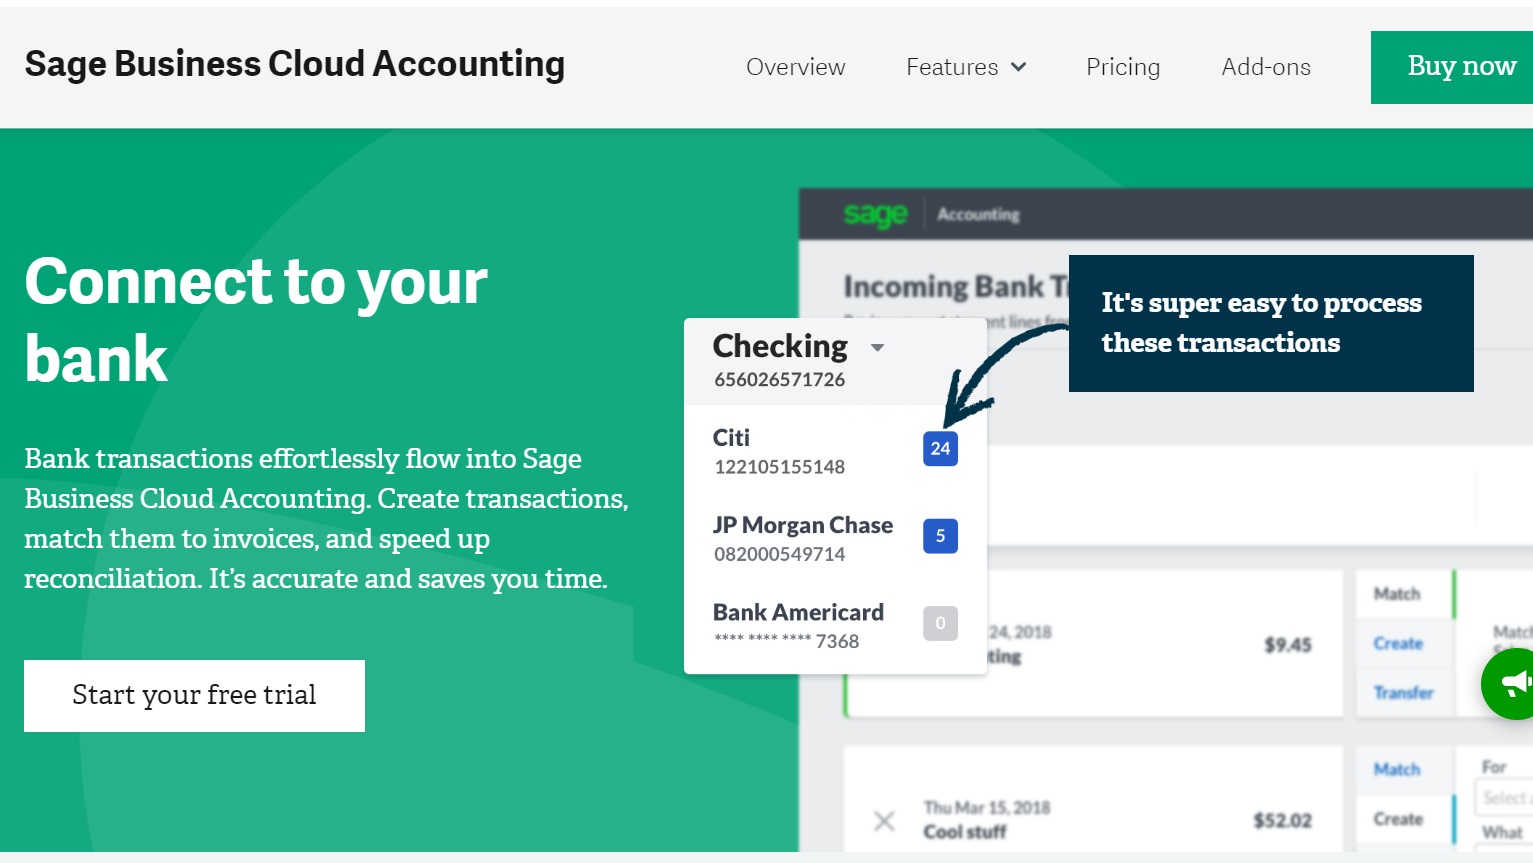 You can easily connect your bank accounts to Sage Business Cloud Accounting